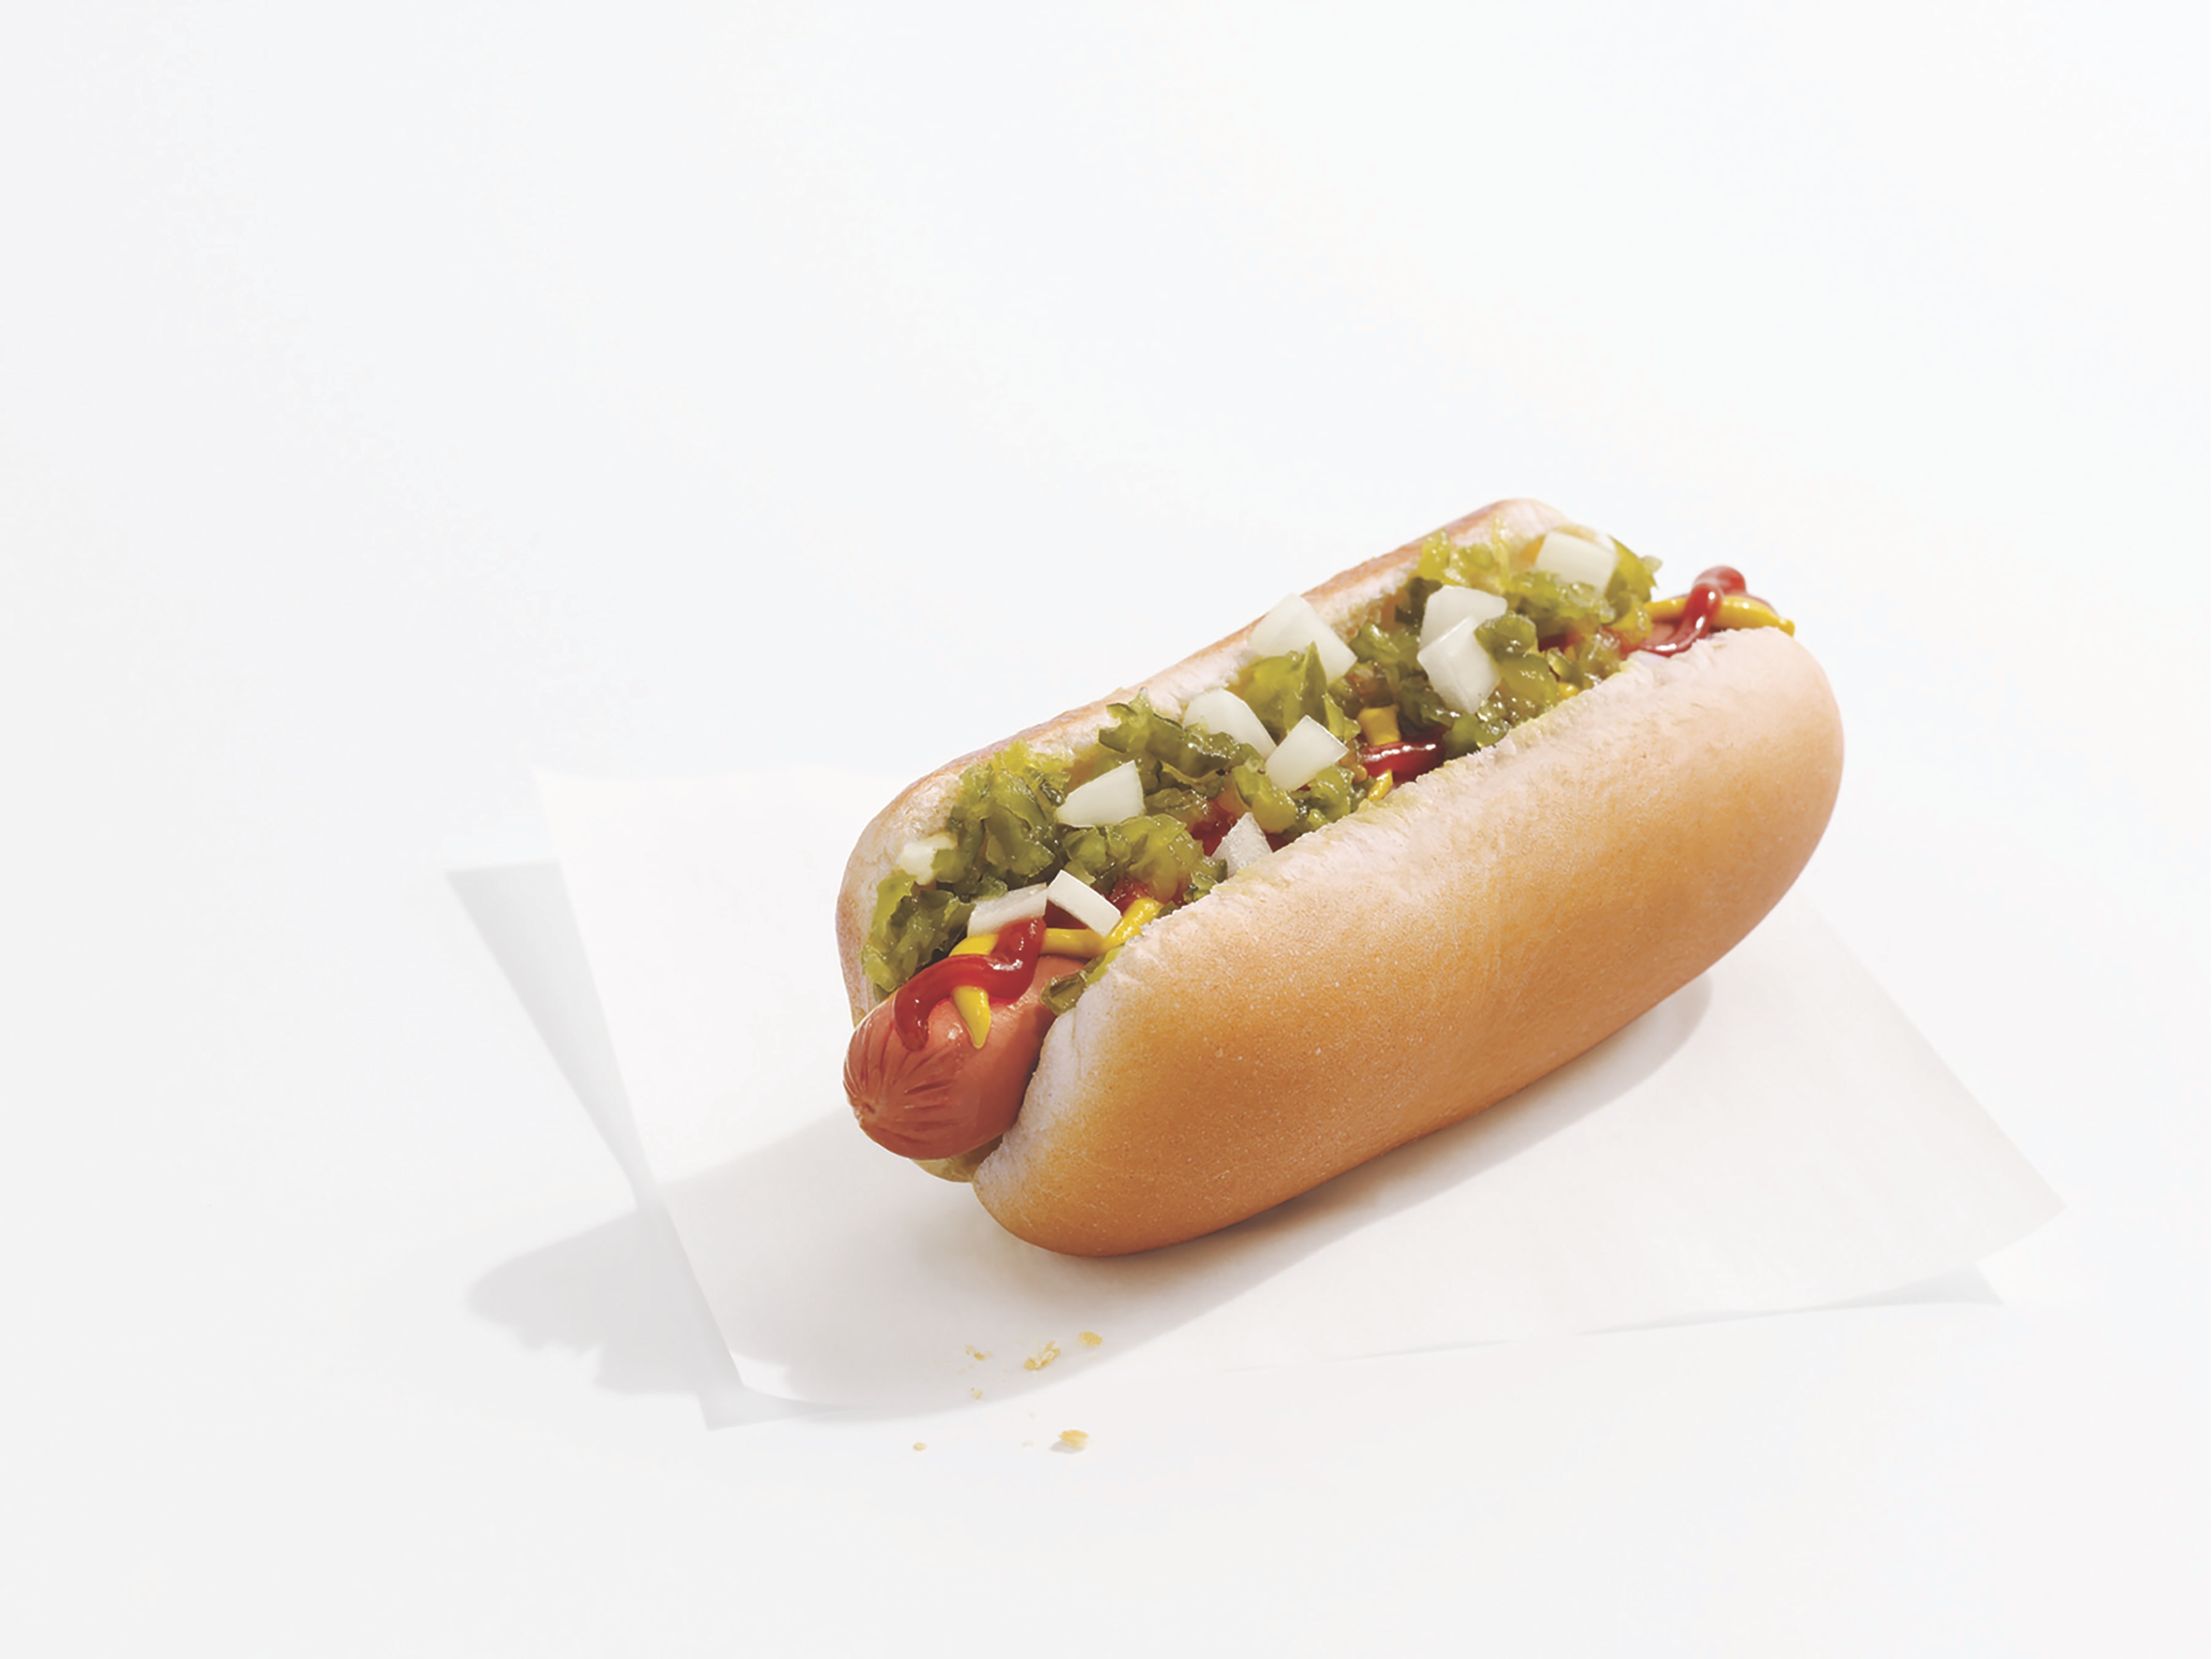 America's Drive-In Celebrates National Hot Dog Day with $1 Hot Dogs ...